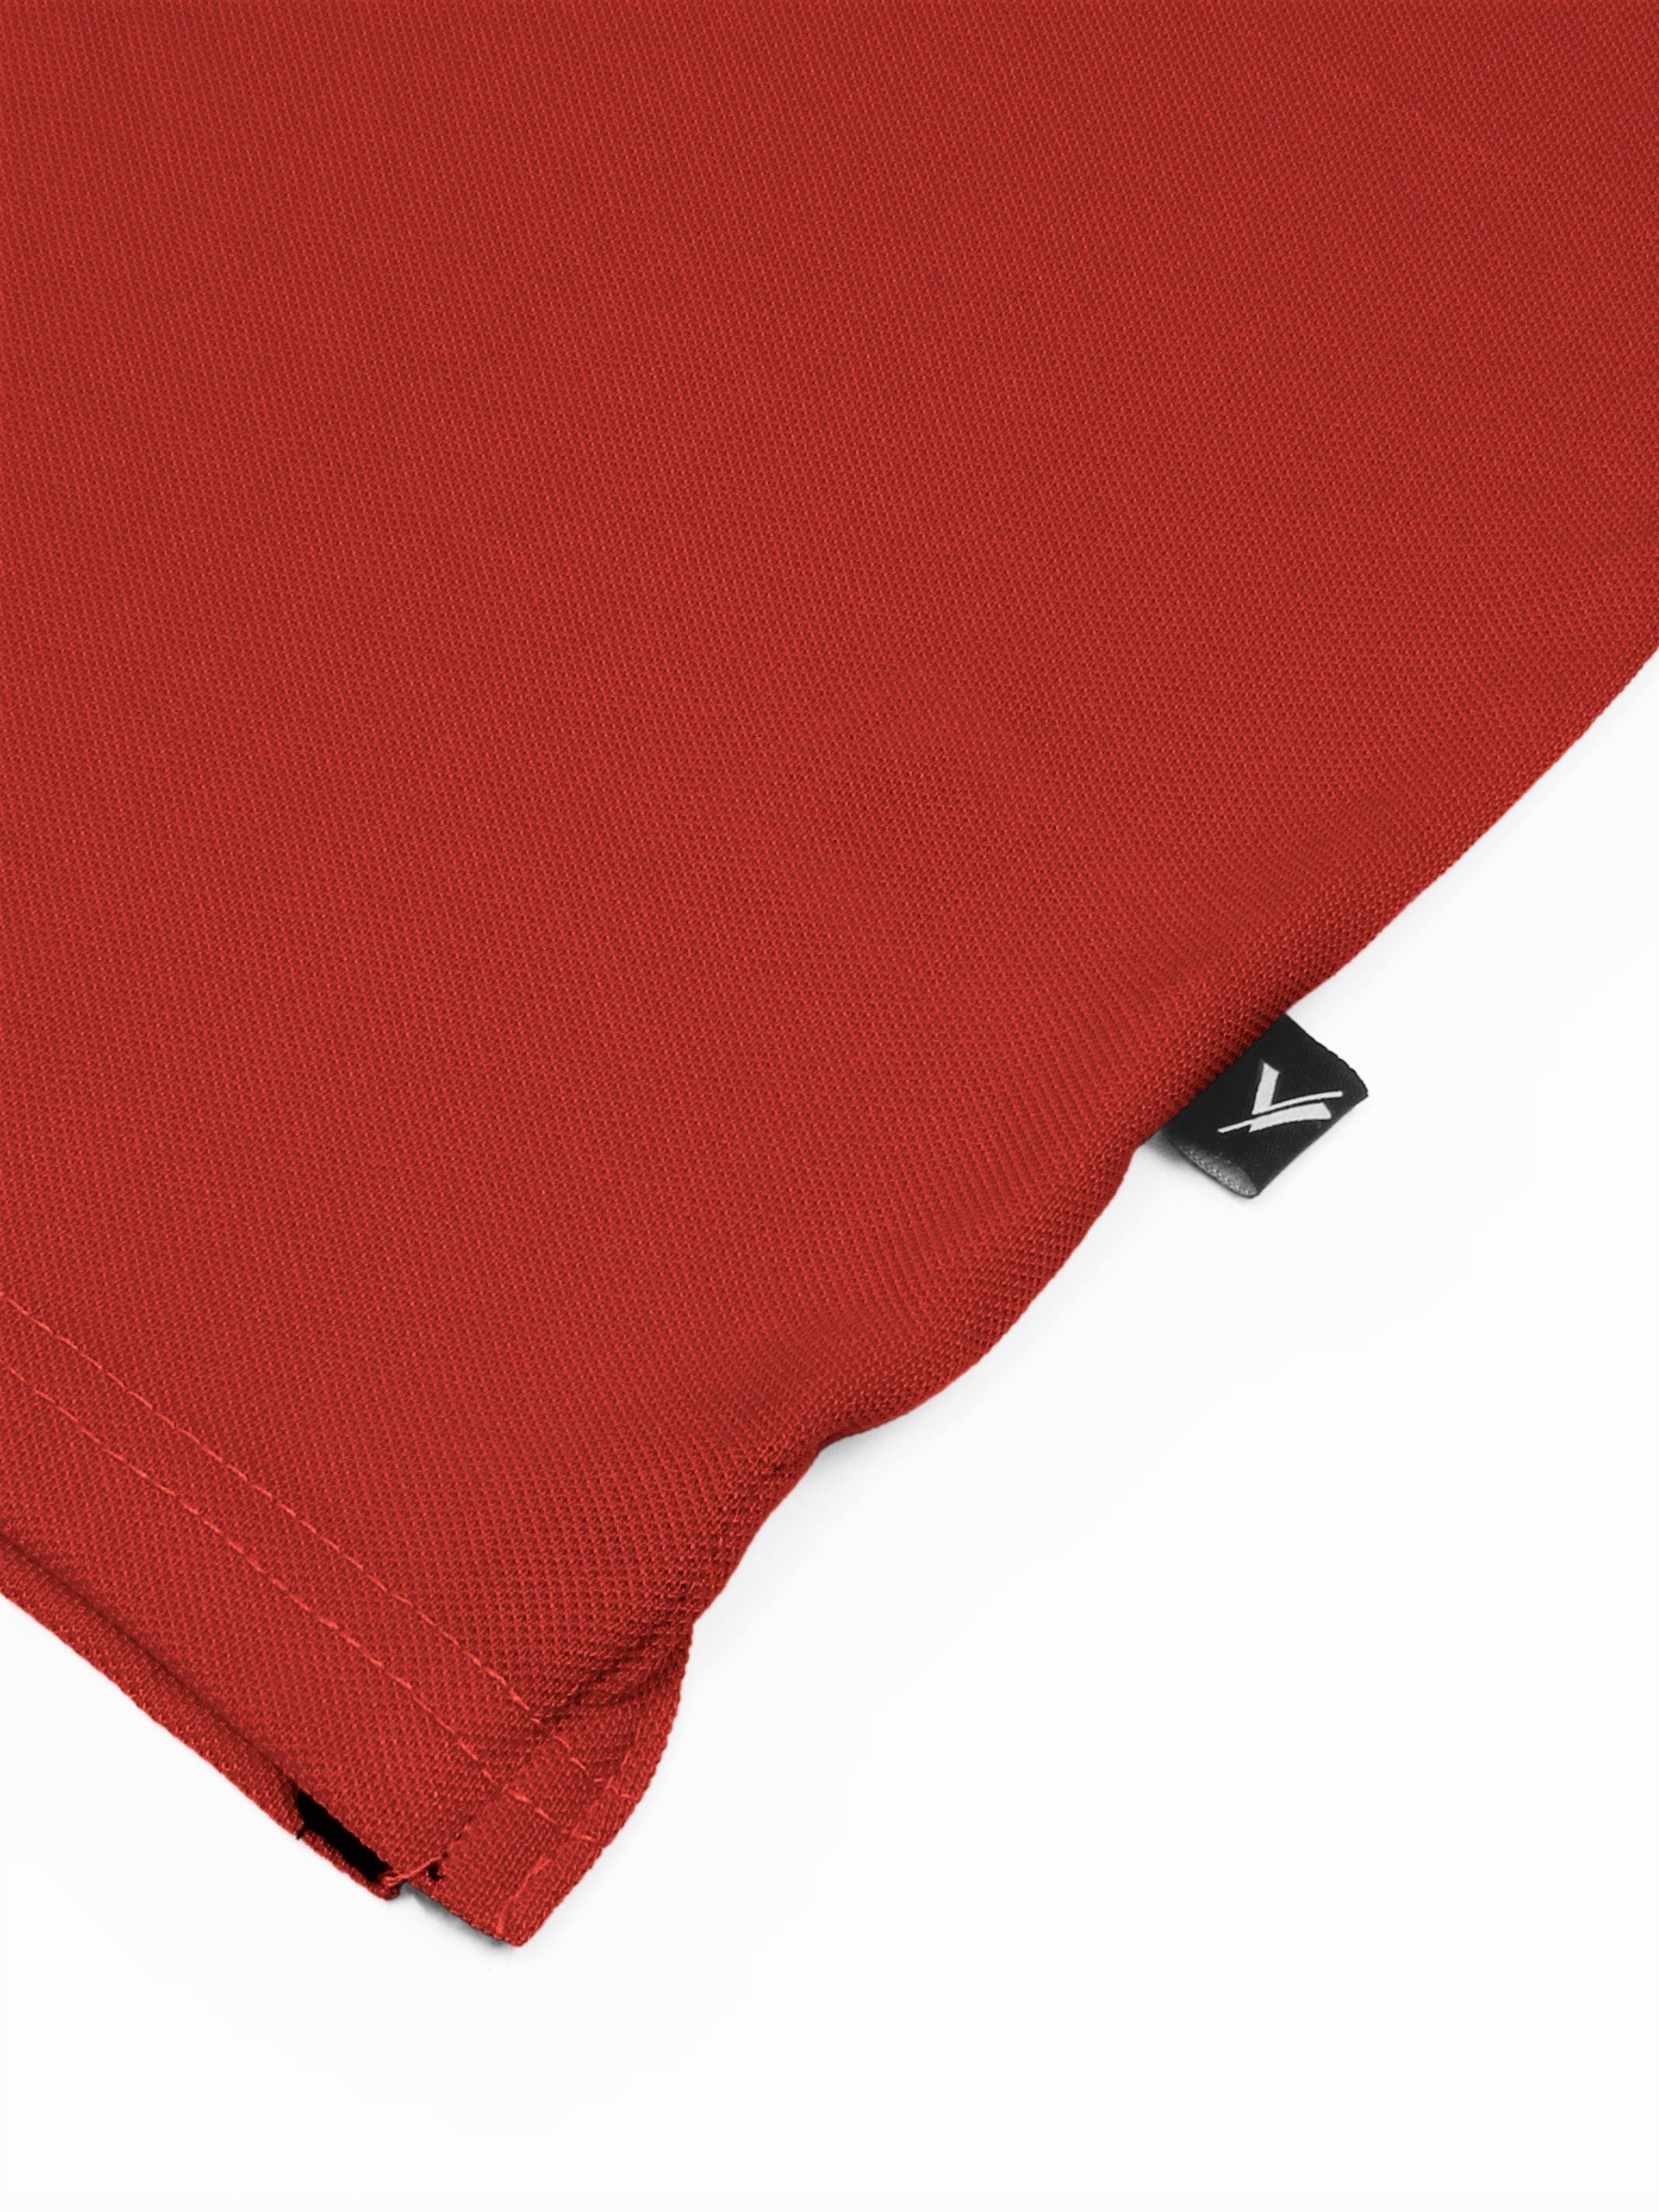 Tipping Collar Polo Shirt For Mens Plain Red